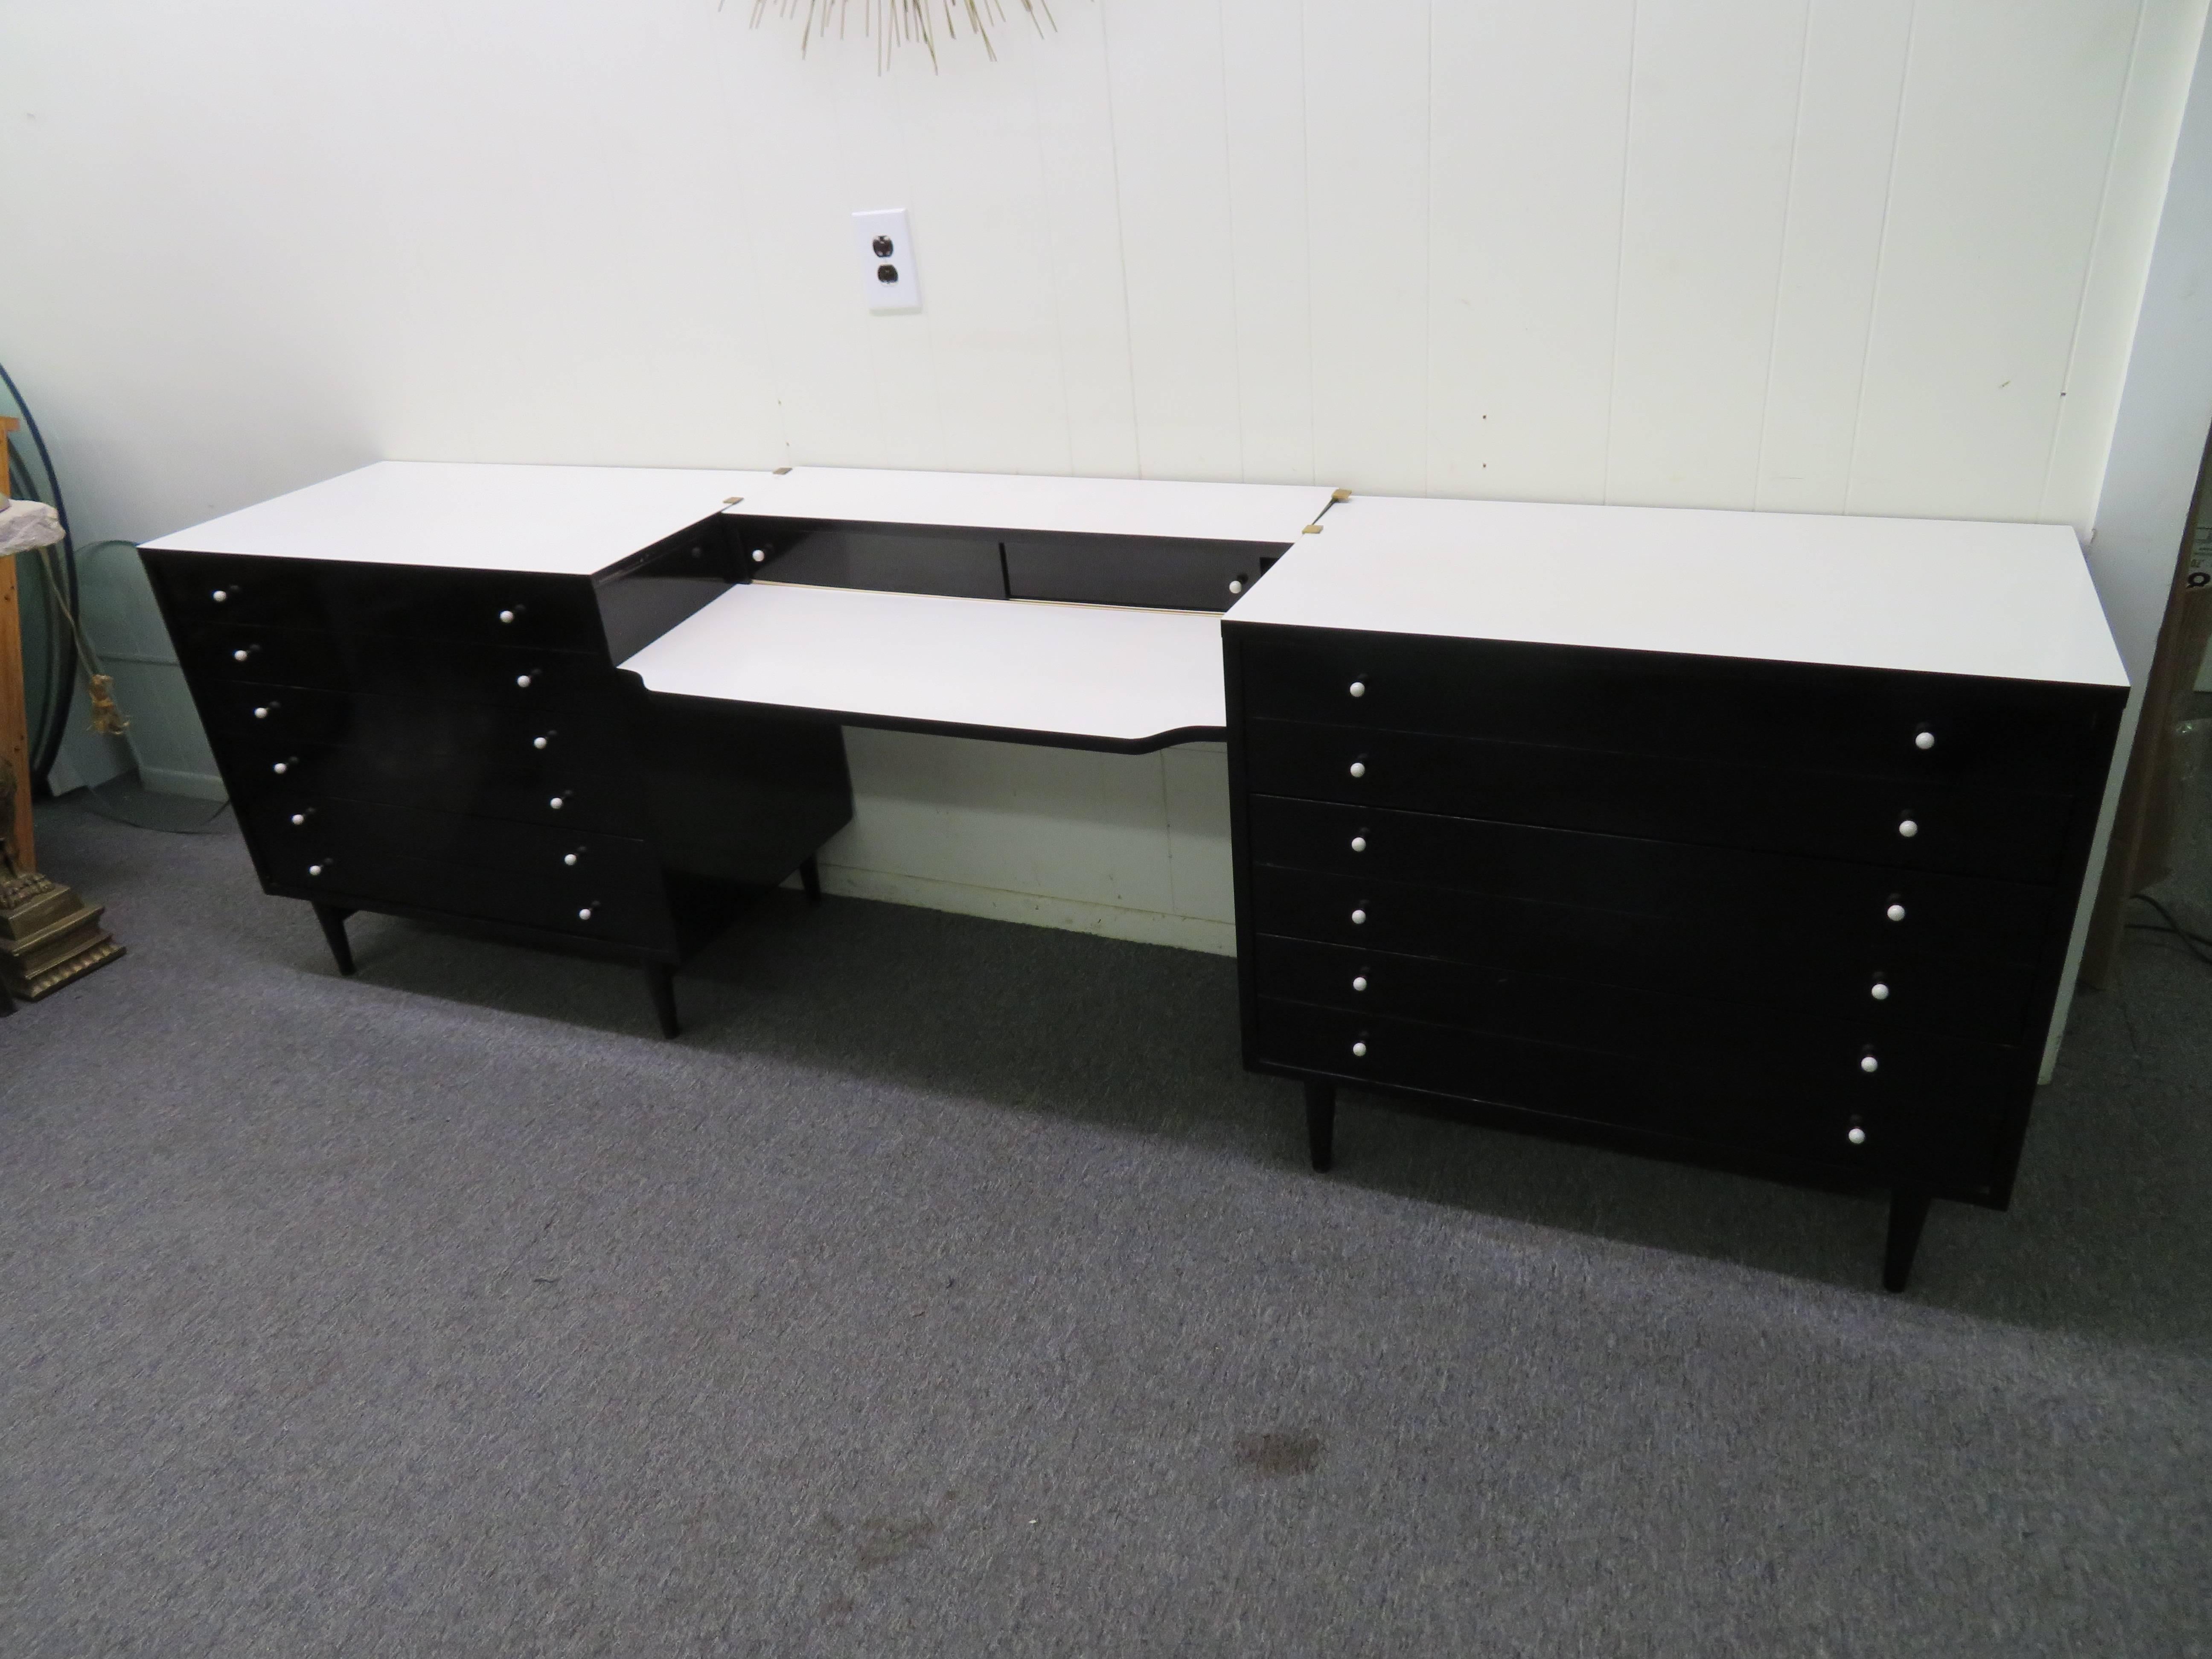 Excellent pair of American of Martinsville black lacquered bachelors chests. These chest have wonderful white formica tops that add great contrast to the black lacquered finish. These chests are in fantastic vintage condition and this sale include